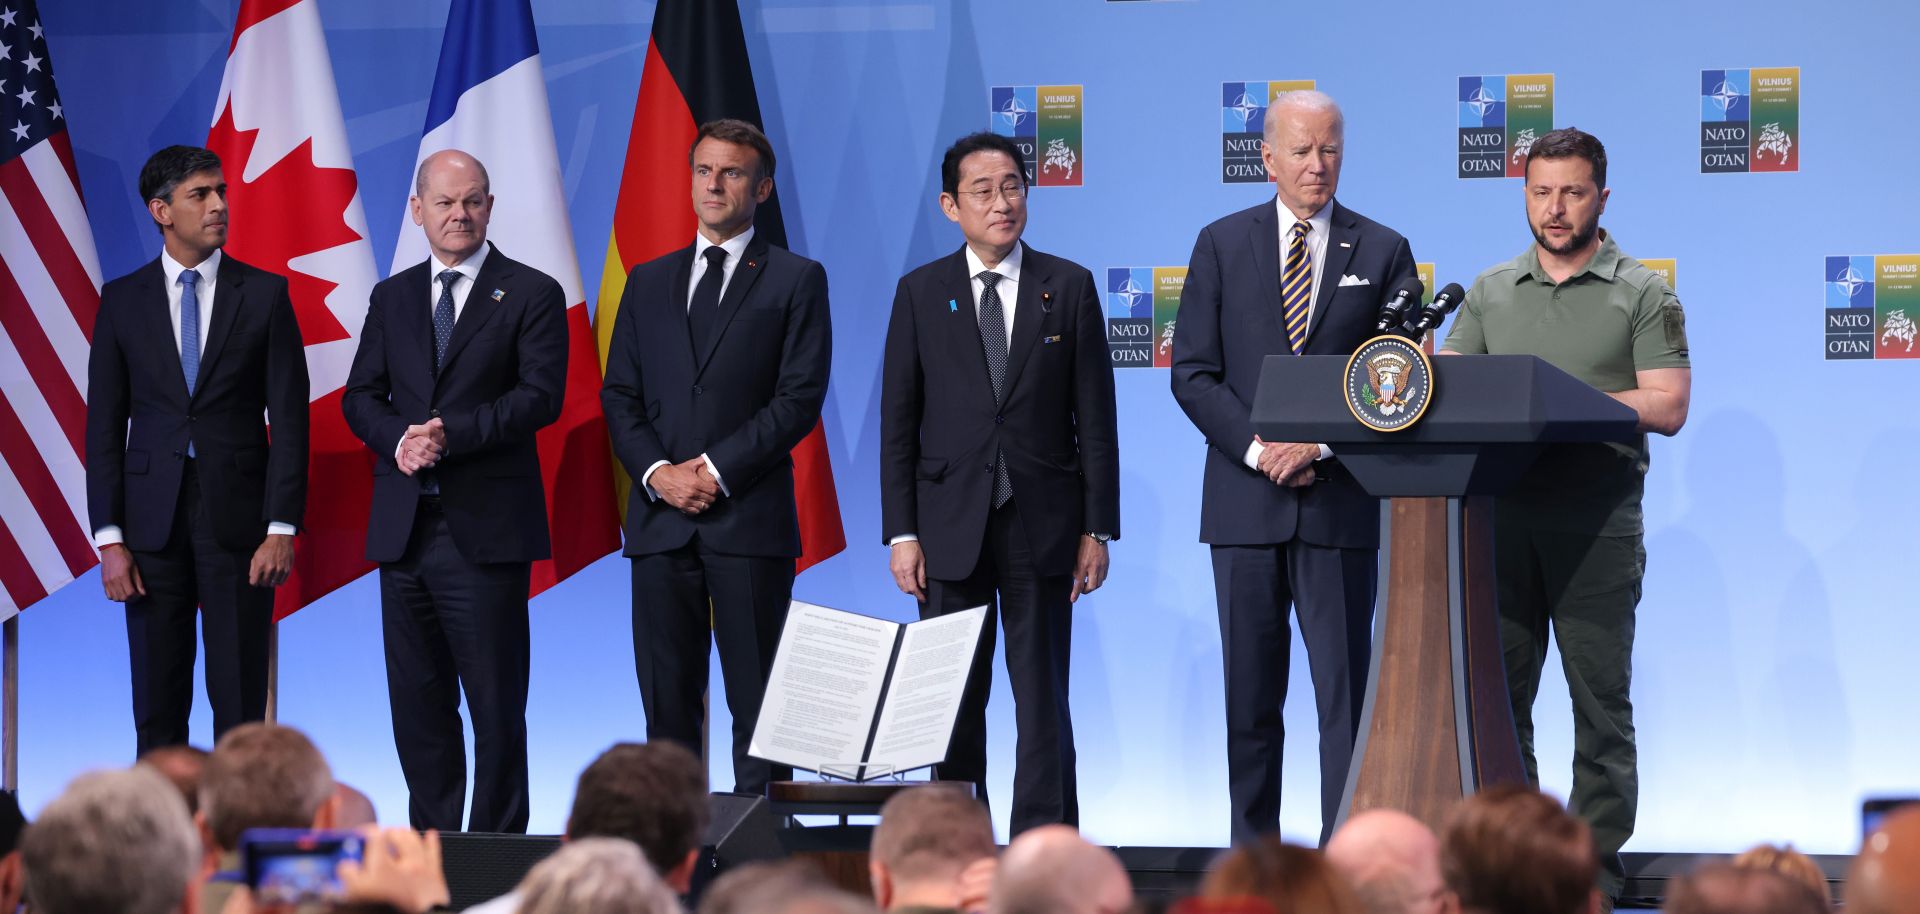 (L to R) U.K. Prime Minister Rishi Sunak, German Chancellor Olaf Scholz, French President Emmanuel Macron, Japanese Prime Minister Fumio Kishida and U.S. President Joe Biden look on as Ukrainian President Volodymyr Zelensky speaks after the announcement of a G-7 joint declaration in support of his country during the 2023 NATO summit on July 12, 2023, in Vilnius, Lithuania.